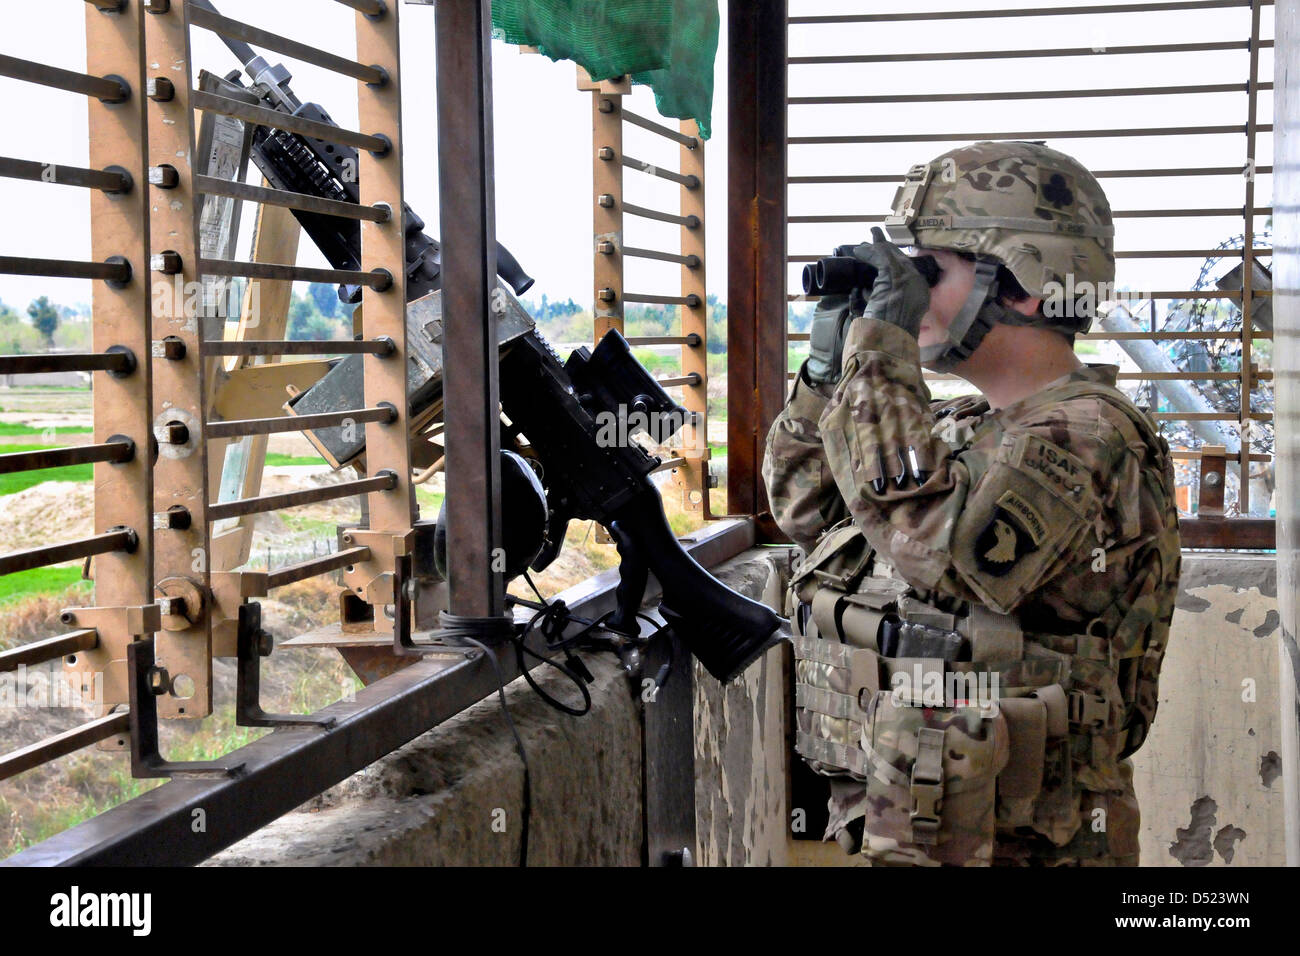 US Army Sgt. Amanda Olmeda provides security from an observation tower on Forward Operating Base Fenty March 13, 2013 in Afghanistan's Nangarhar province. Stock Photo